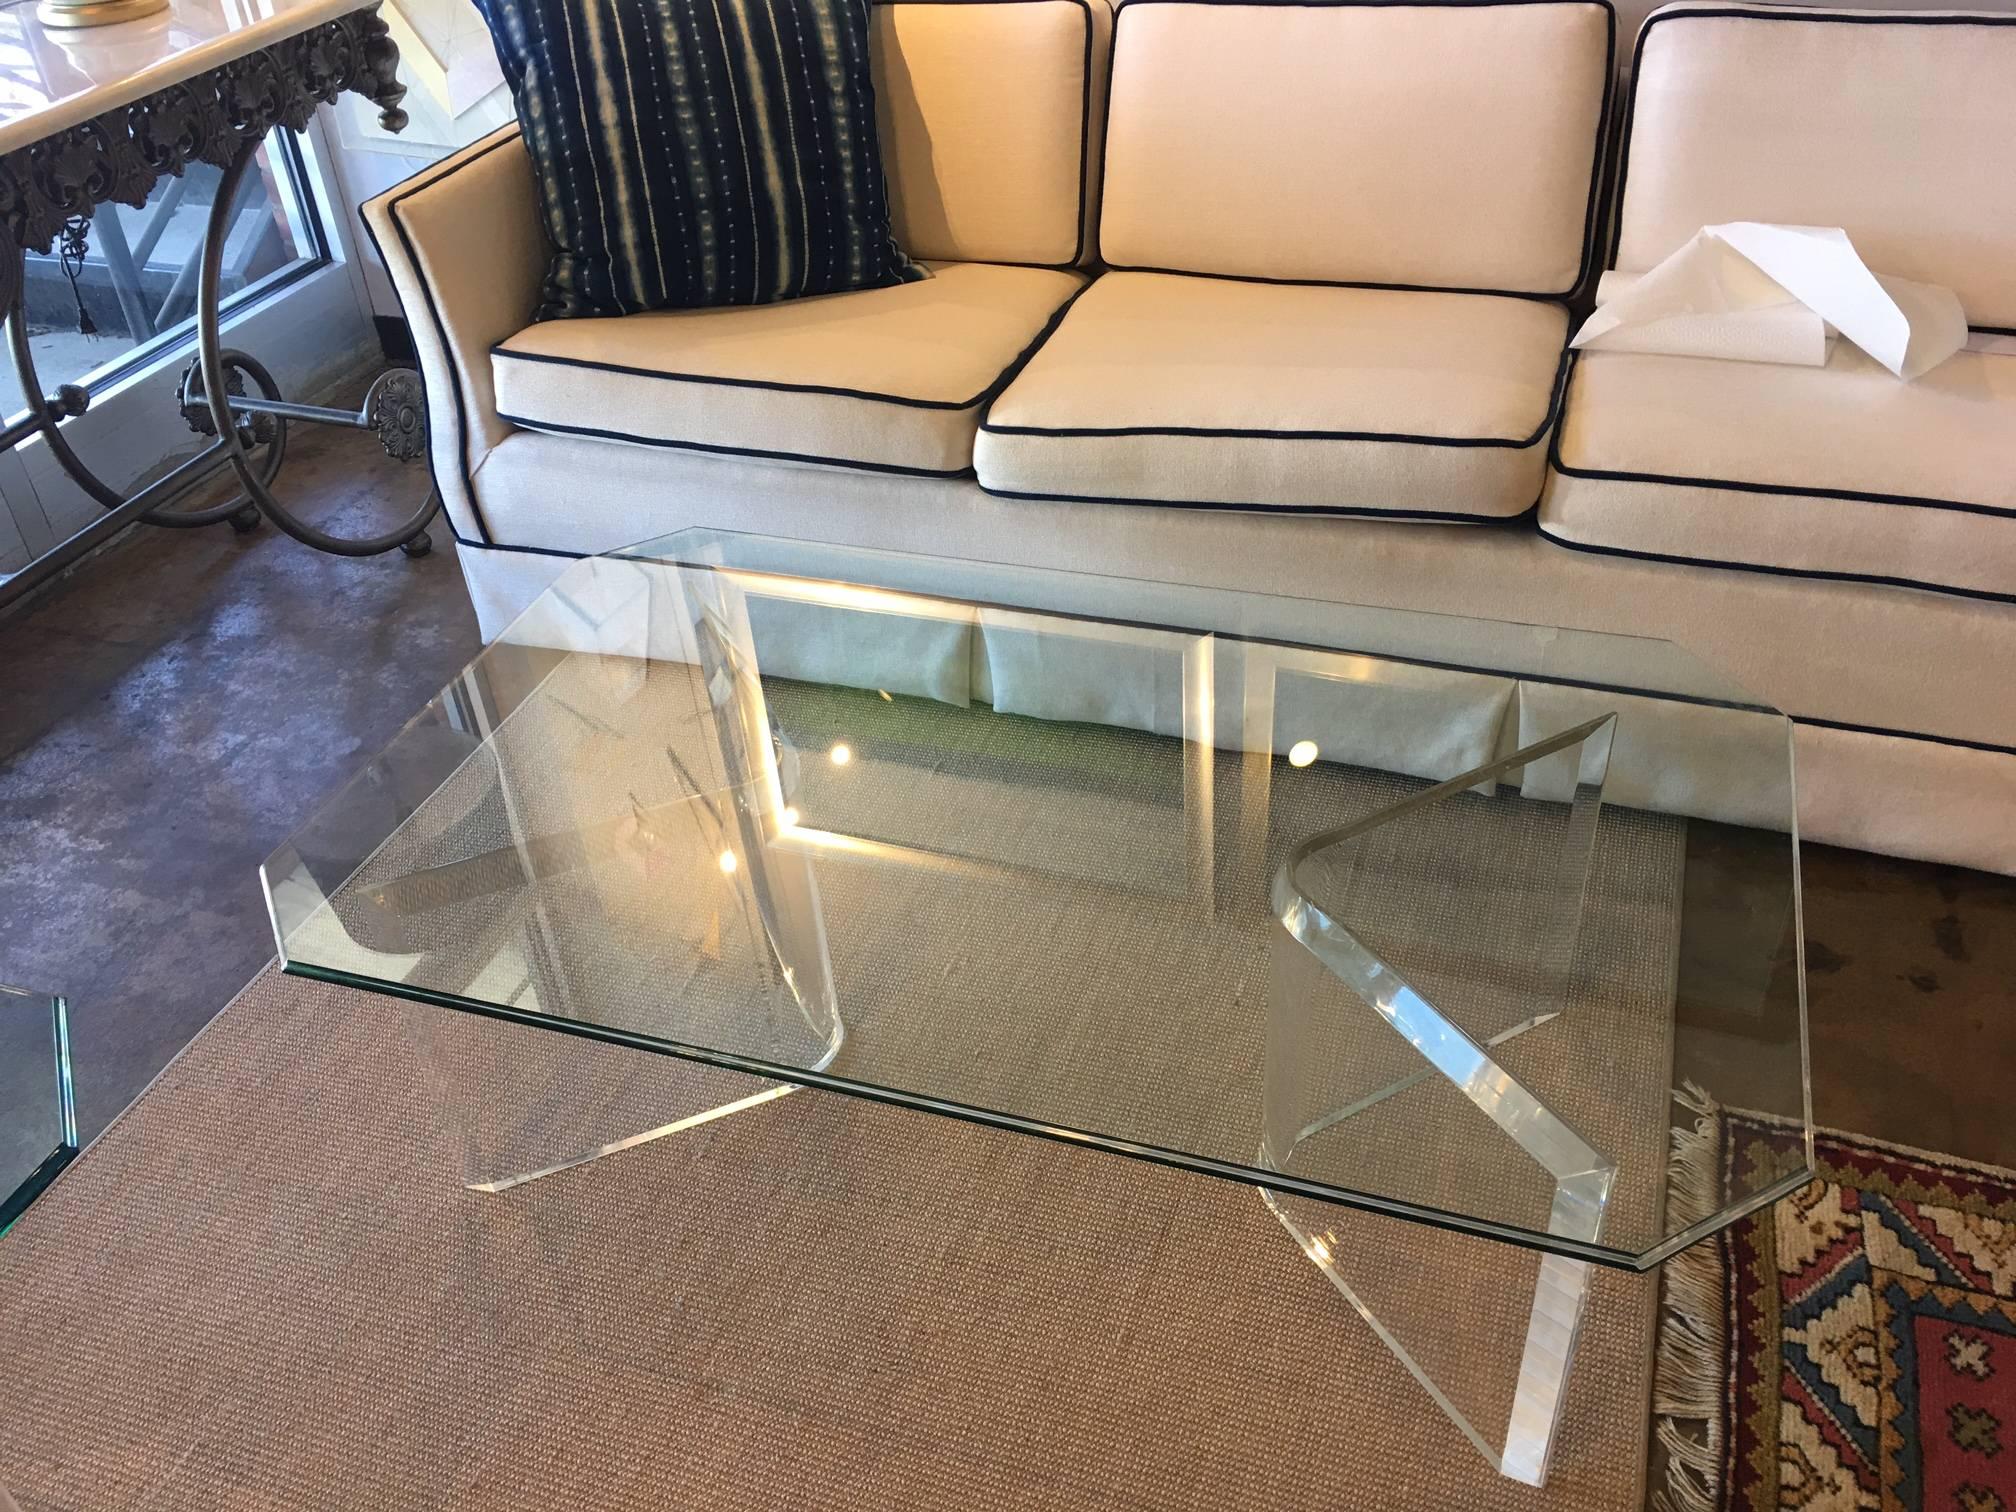 This modern coffee table is in excellent vintage condition. It has been in storage (covered) for a decade and probably hales from the 1970s. The Lucite bases can be configured facing either way and can be placed at different angles and distances. We